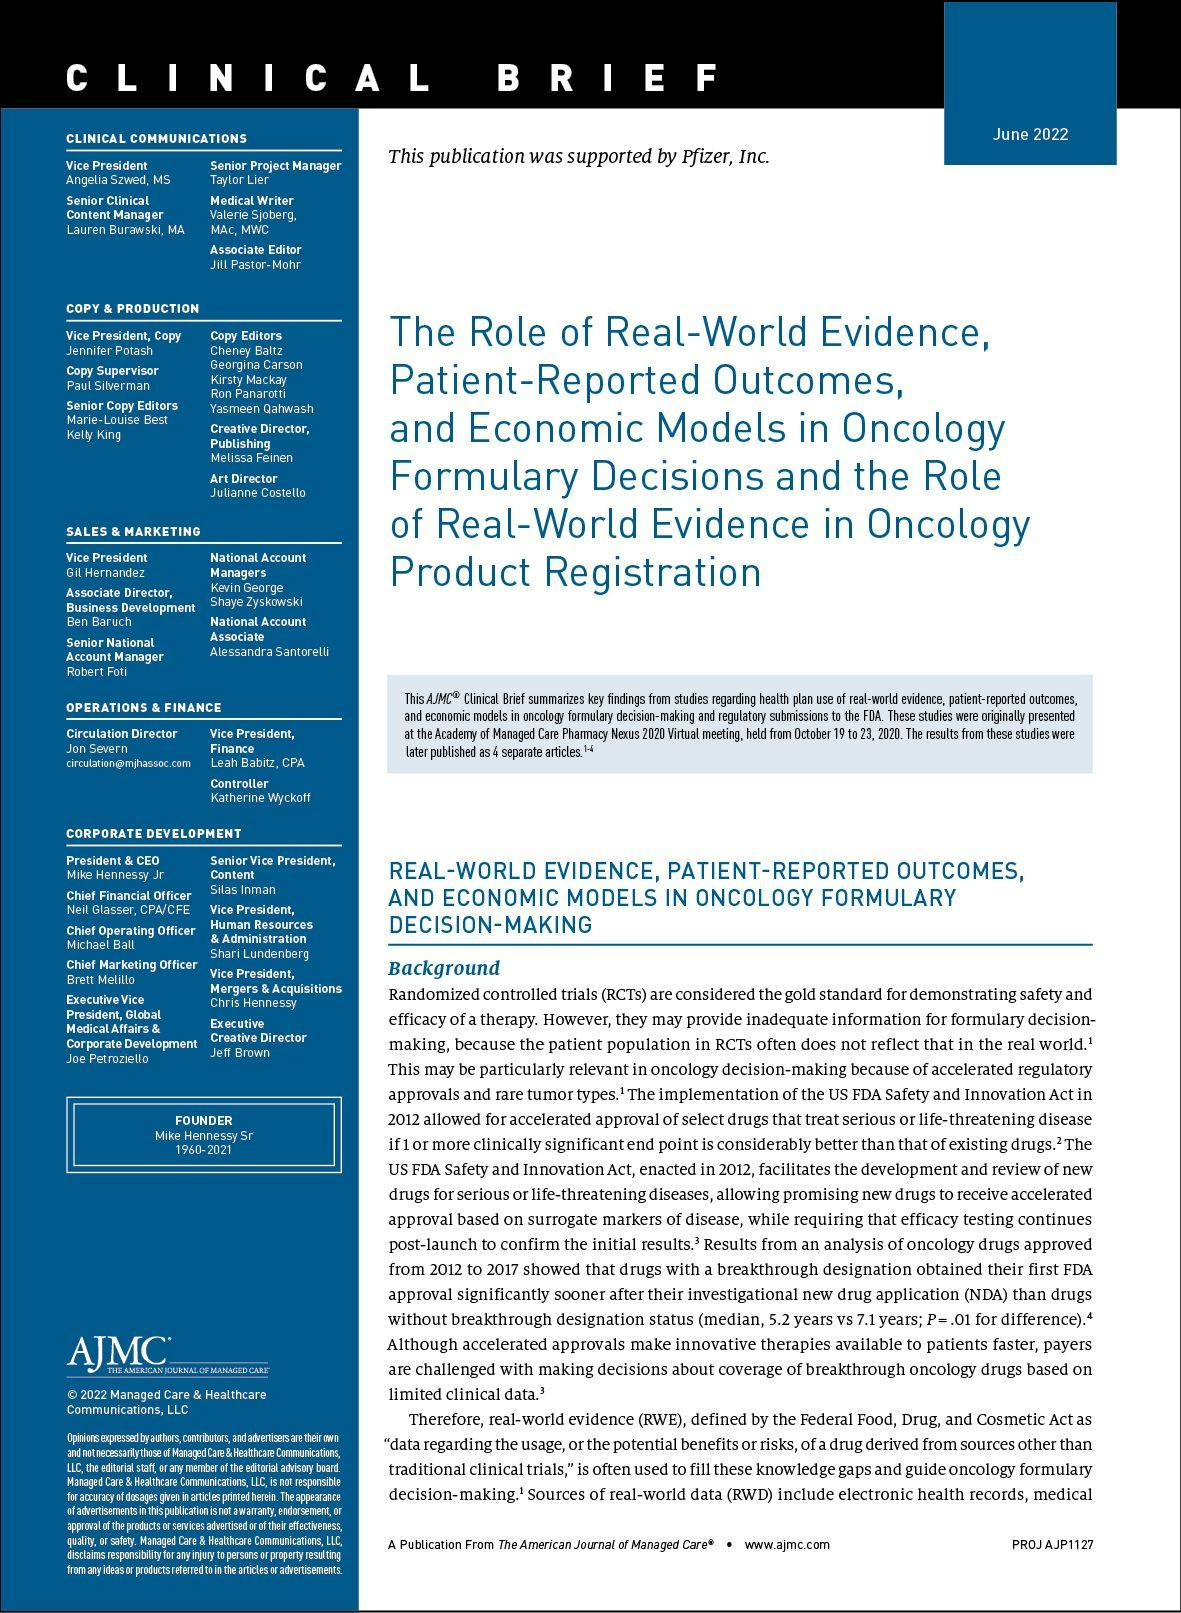 The Role of Real-World Evidence, Patient-Reported Outcomes, and Economic Models in Oncology Formulary Decisions and the Role of Real-World Evidence in Oncology Product Registration